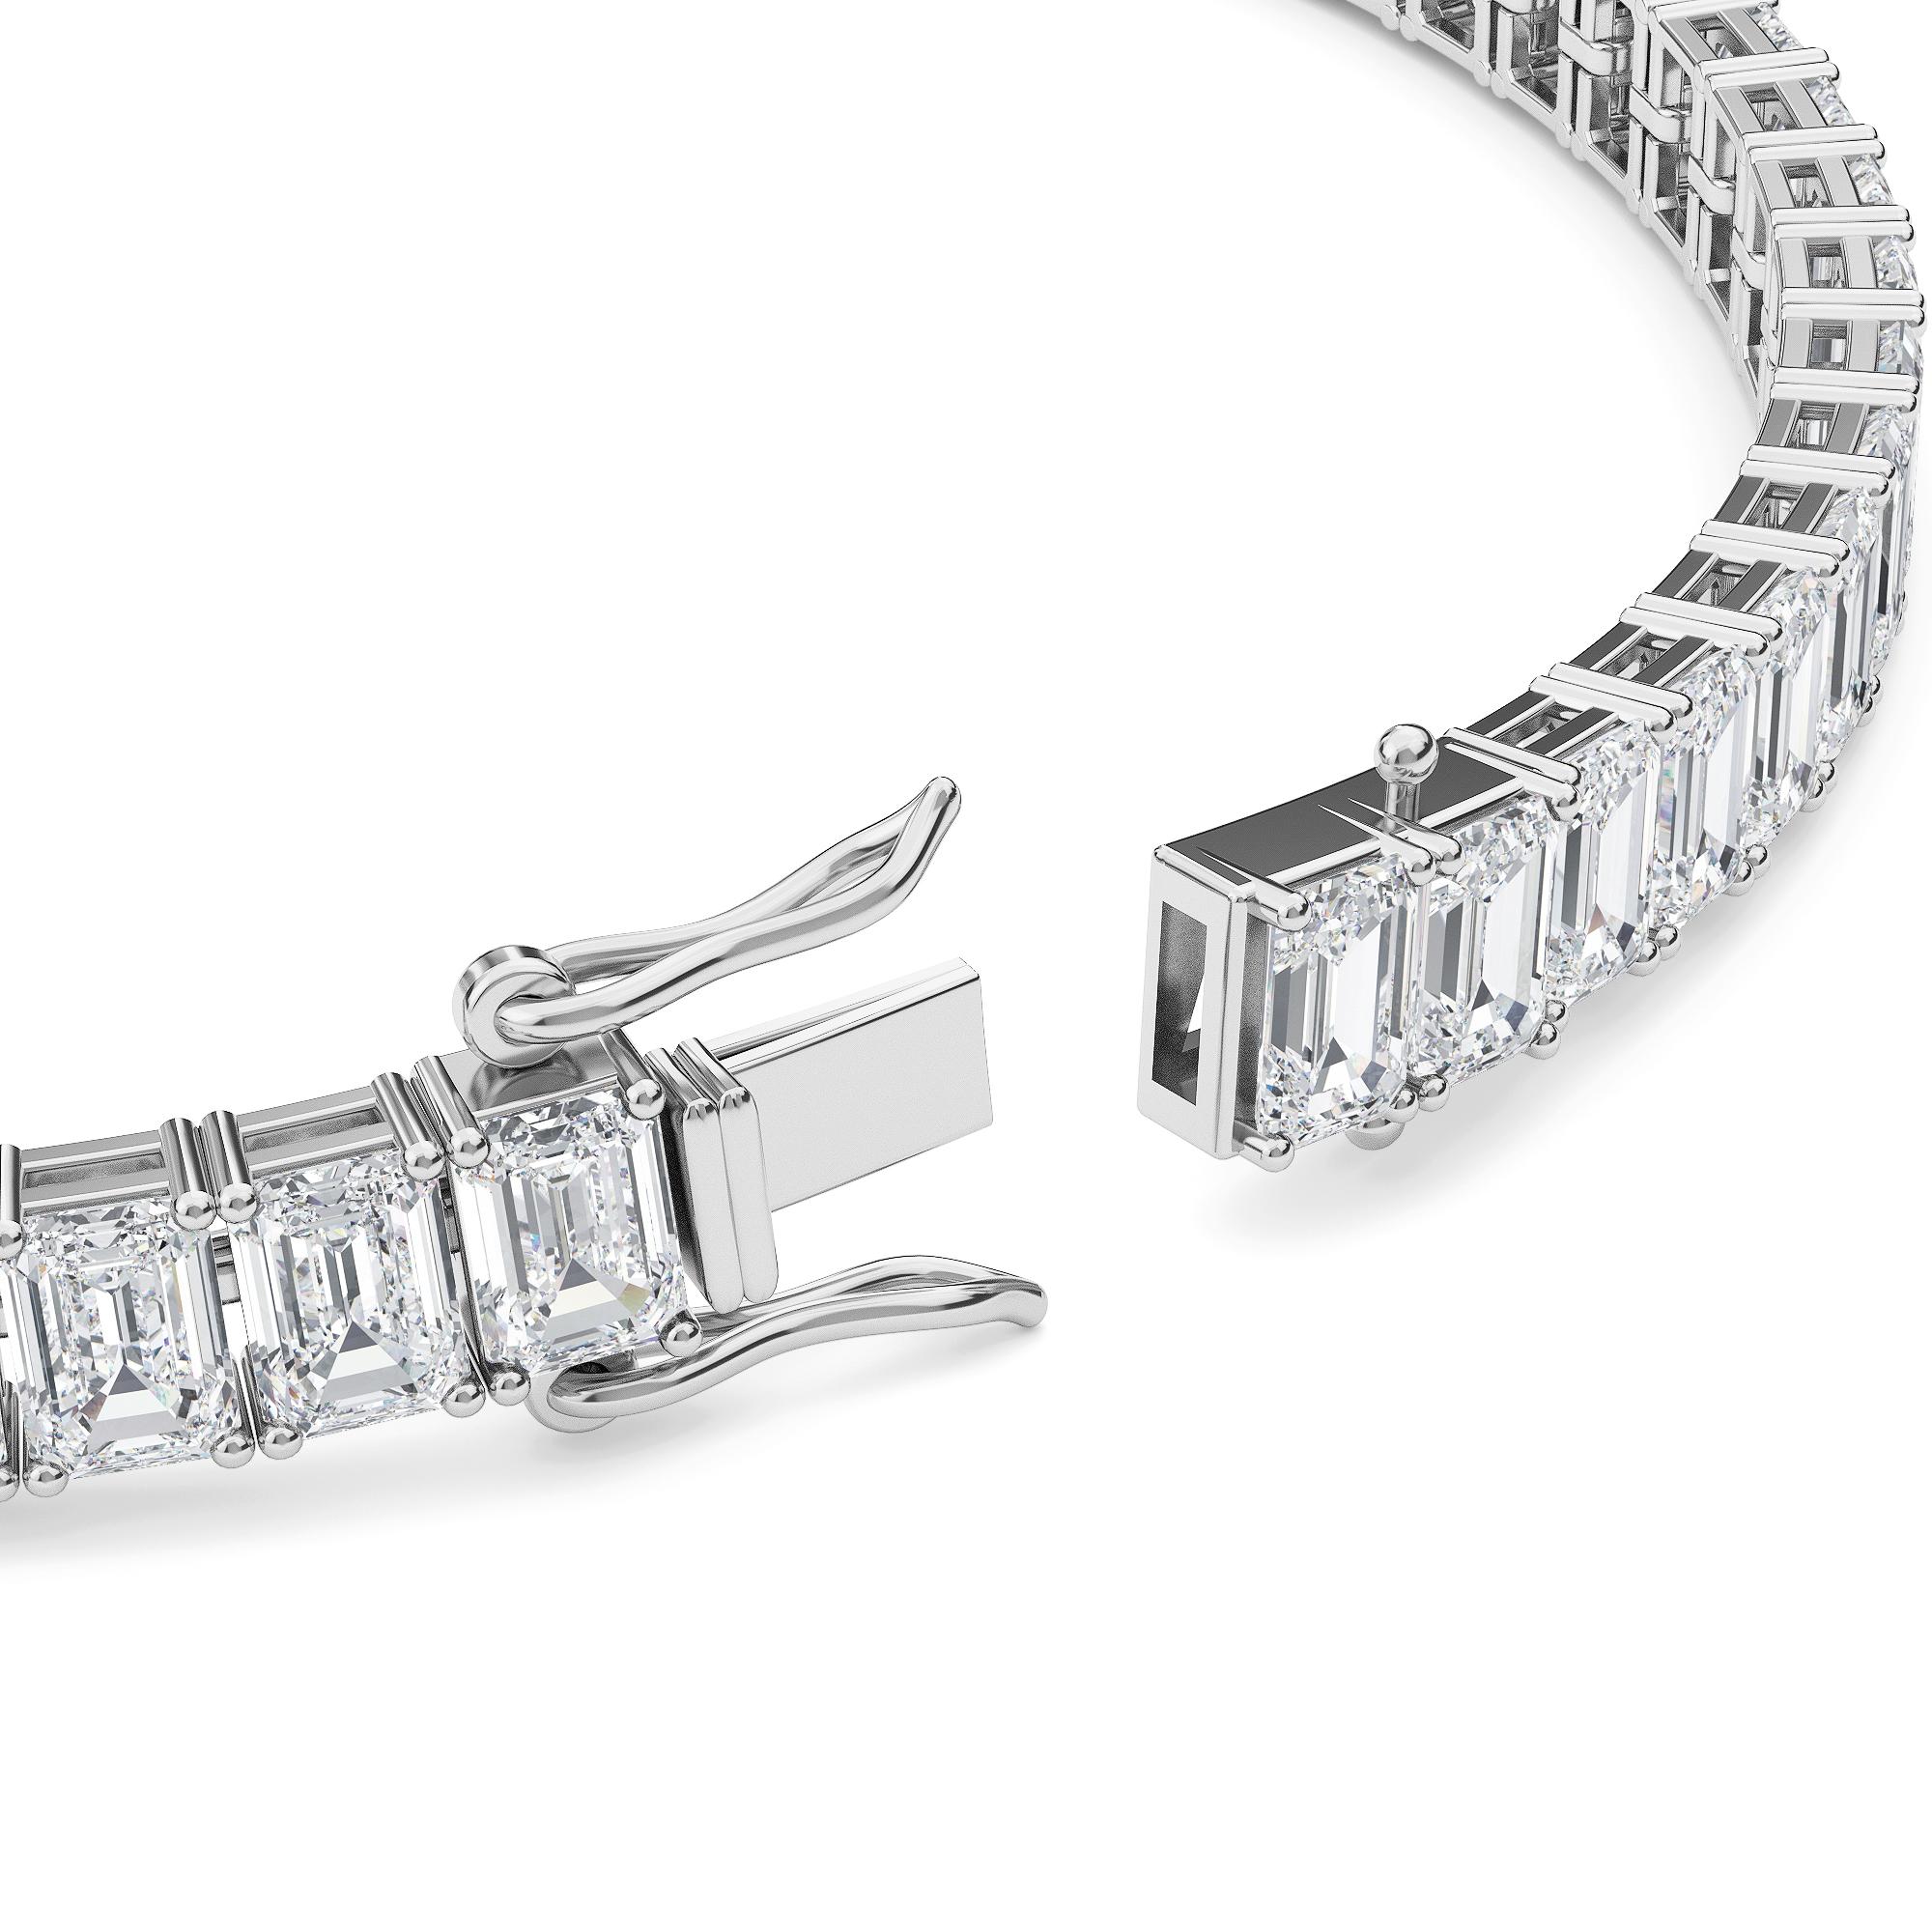 Elegant and splendid, this attractive design bracelet consists of four prong-set emerald-cut Diamond. Fasten with a secure clasp.

